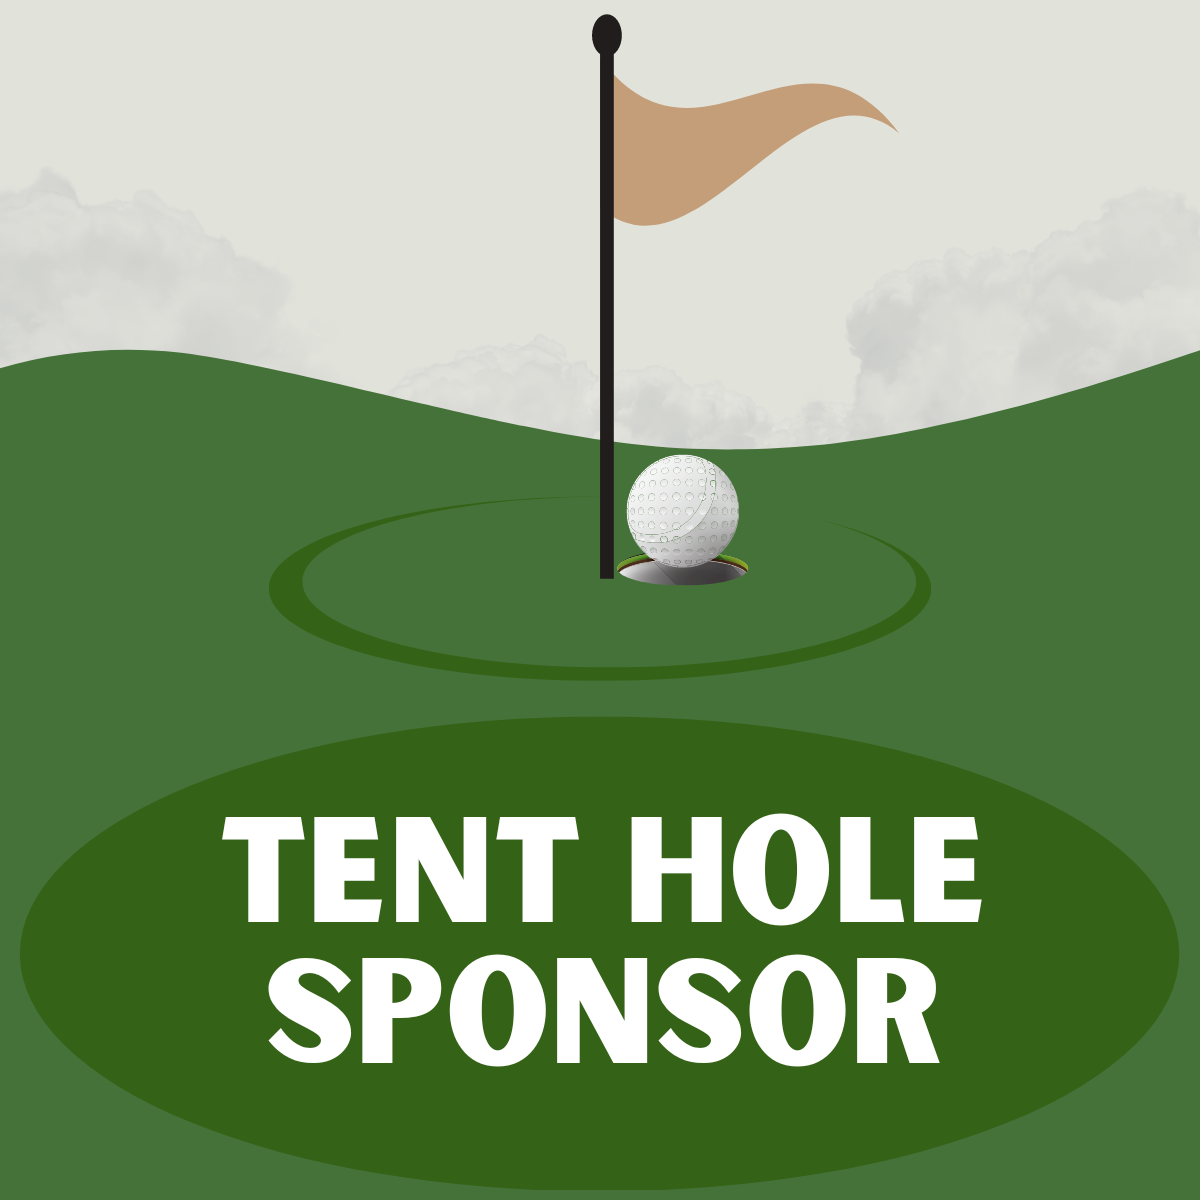 Tent Hole Sponsor - New Mexico Open